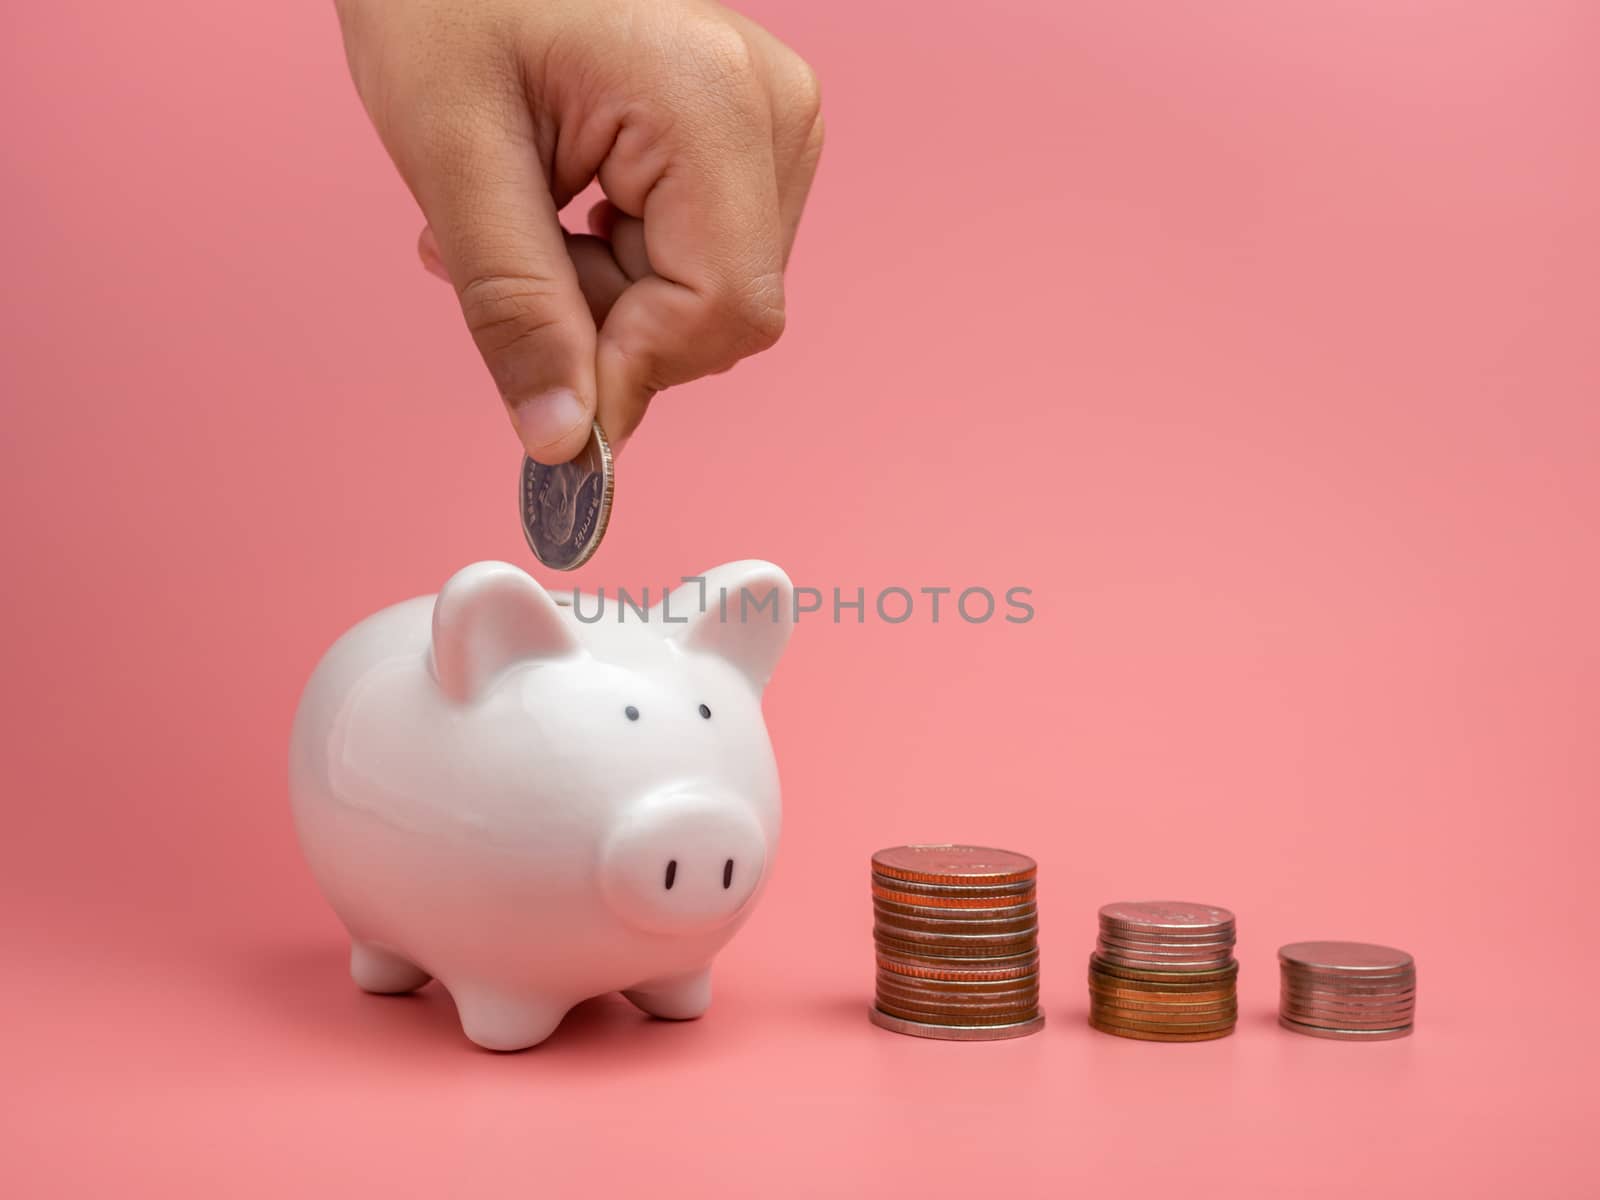 White piggy Bank and coin and human hand putting coin in piggy bank on a pink background. Copy space for design.